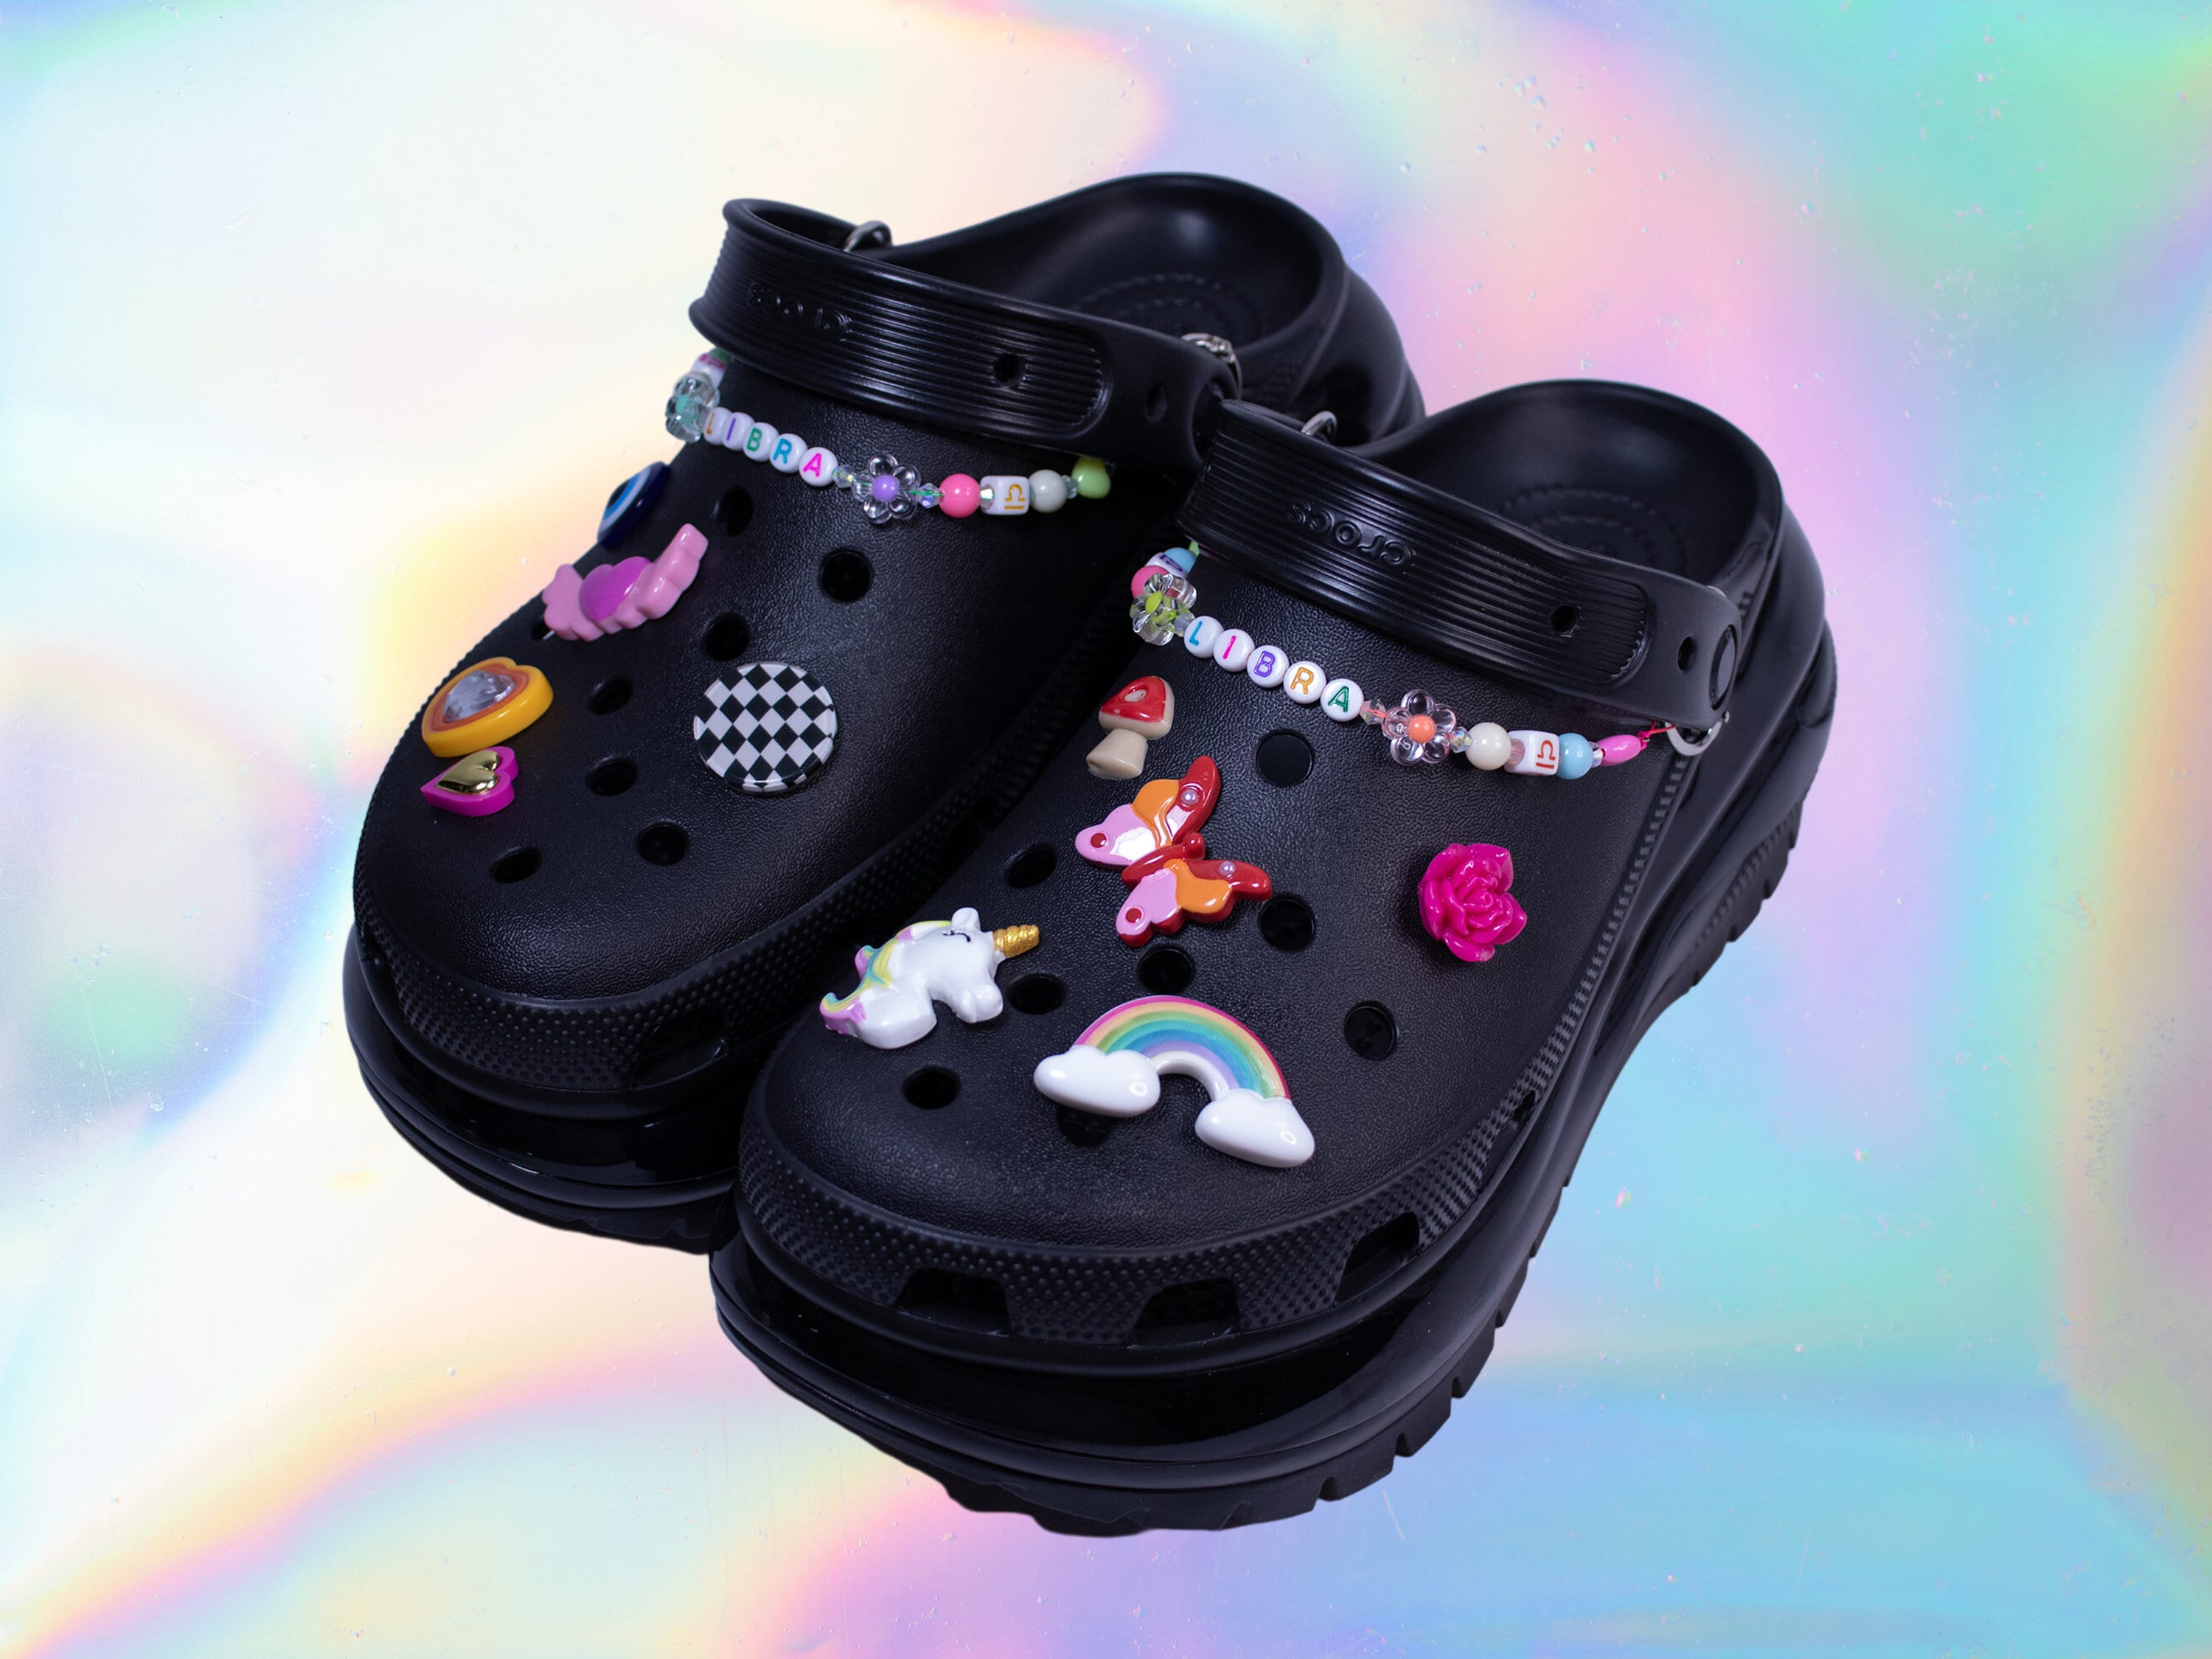 An  shop is selling black GOTH Crocs with studs, spikes, and chains for  $260